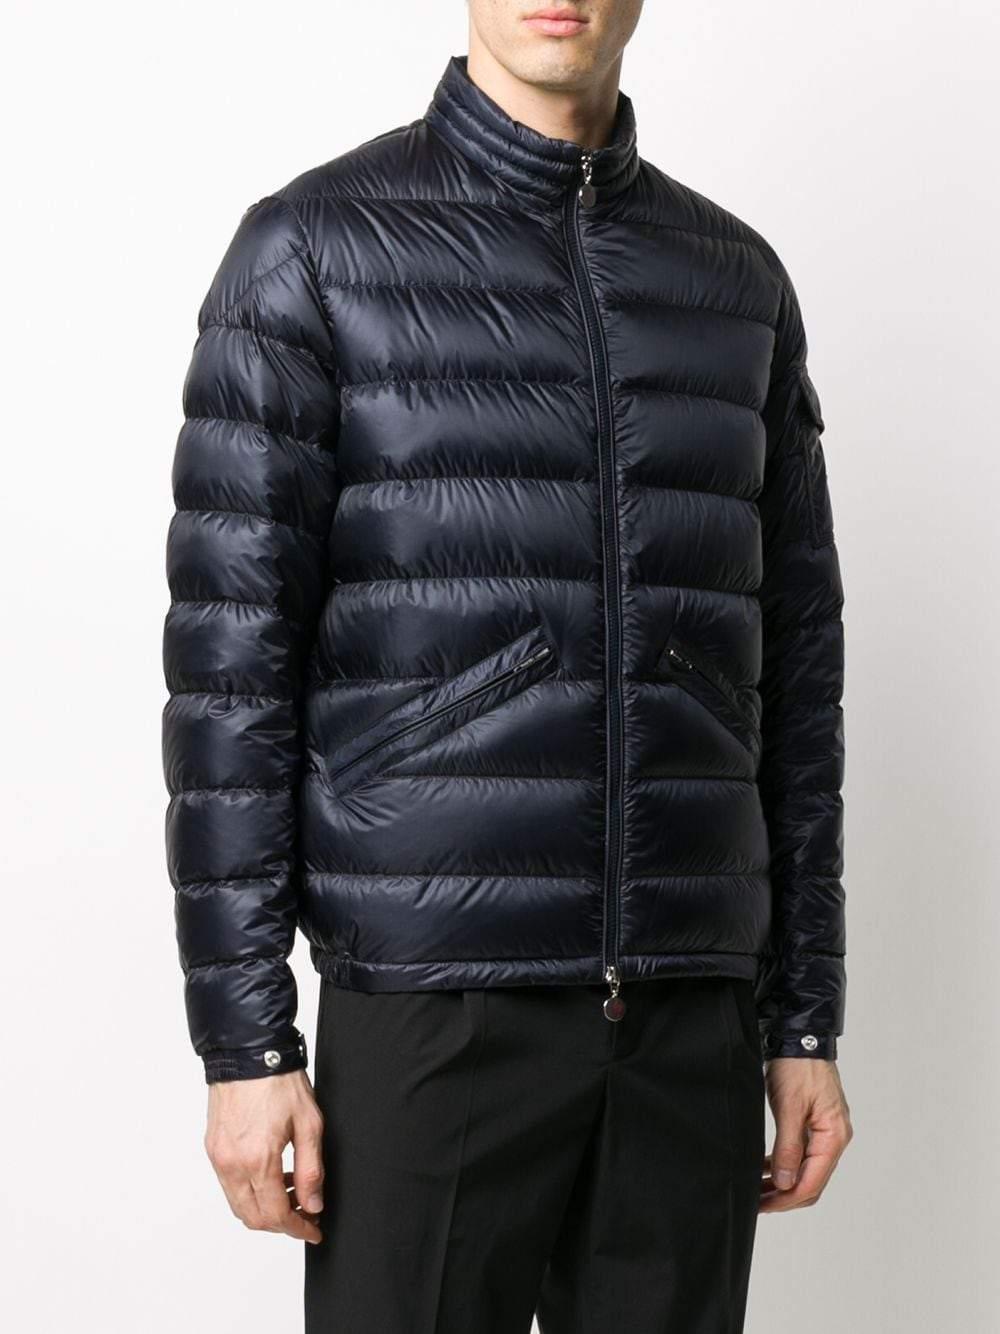 Moncler Synthetic Agay Giubbotto Padded Jacket Navy in Blue for Men - Lyst